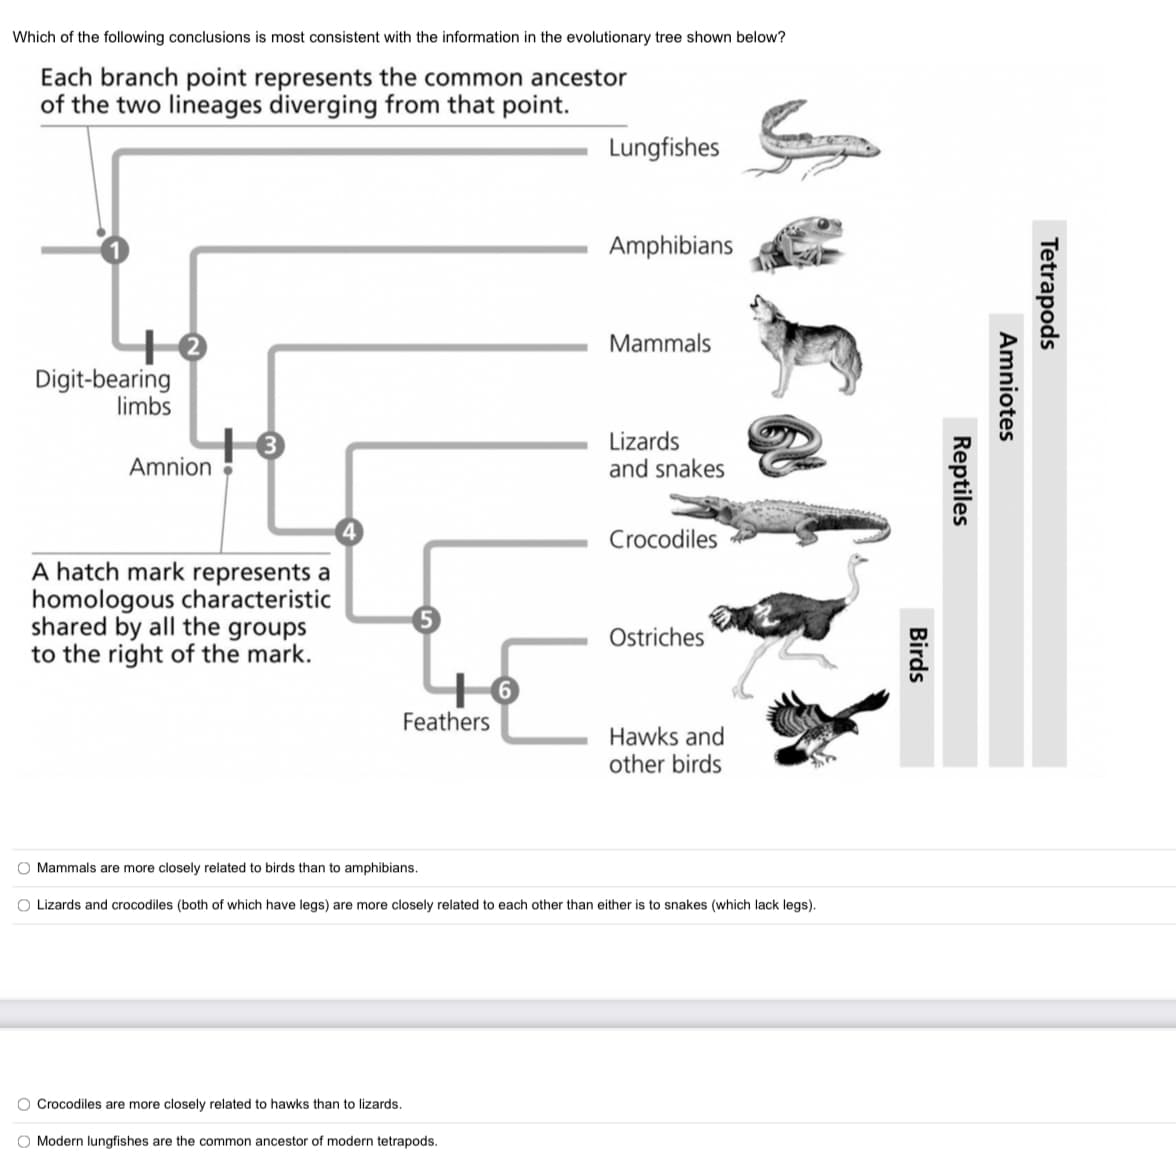 Which of the following conclusions is most consistent with the information in the evolutionary tree shown below?
Each branch point represents the common ancestor
of the two lineages diverging from that point.
Lungfishes
Amphibians
Mammals
Digit-bearing
limbs
Lizards
and snakes
Amnion
Crocodiles
A hatch mark represents a
homologous characteristic
shared by all the groups
to the right of the mark.
Ostriches
Feathers
Hawks and
other birds
O Mammals are more closely related to birds than to amphibians.
O Lizards and crocodiles (both of which have legs) are more closely related to each other than either is to snakes (which lack legs).
O Crocodiles are more closely related to hawks than to lizards.
O Modern lungfishes are the common ancestor of modern tetrapods.
Tetrapods
Amniotes
Reptiles
Birds
